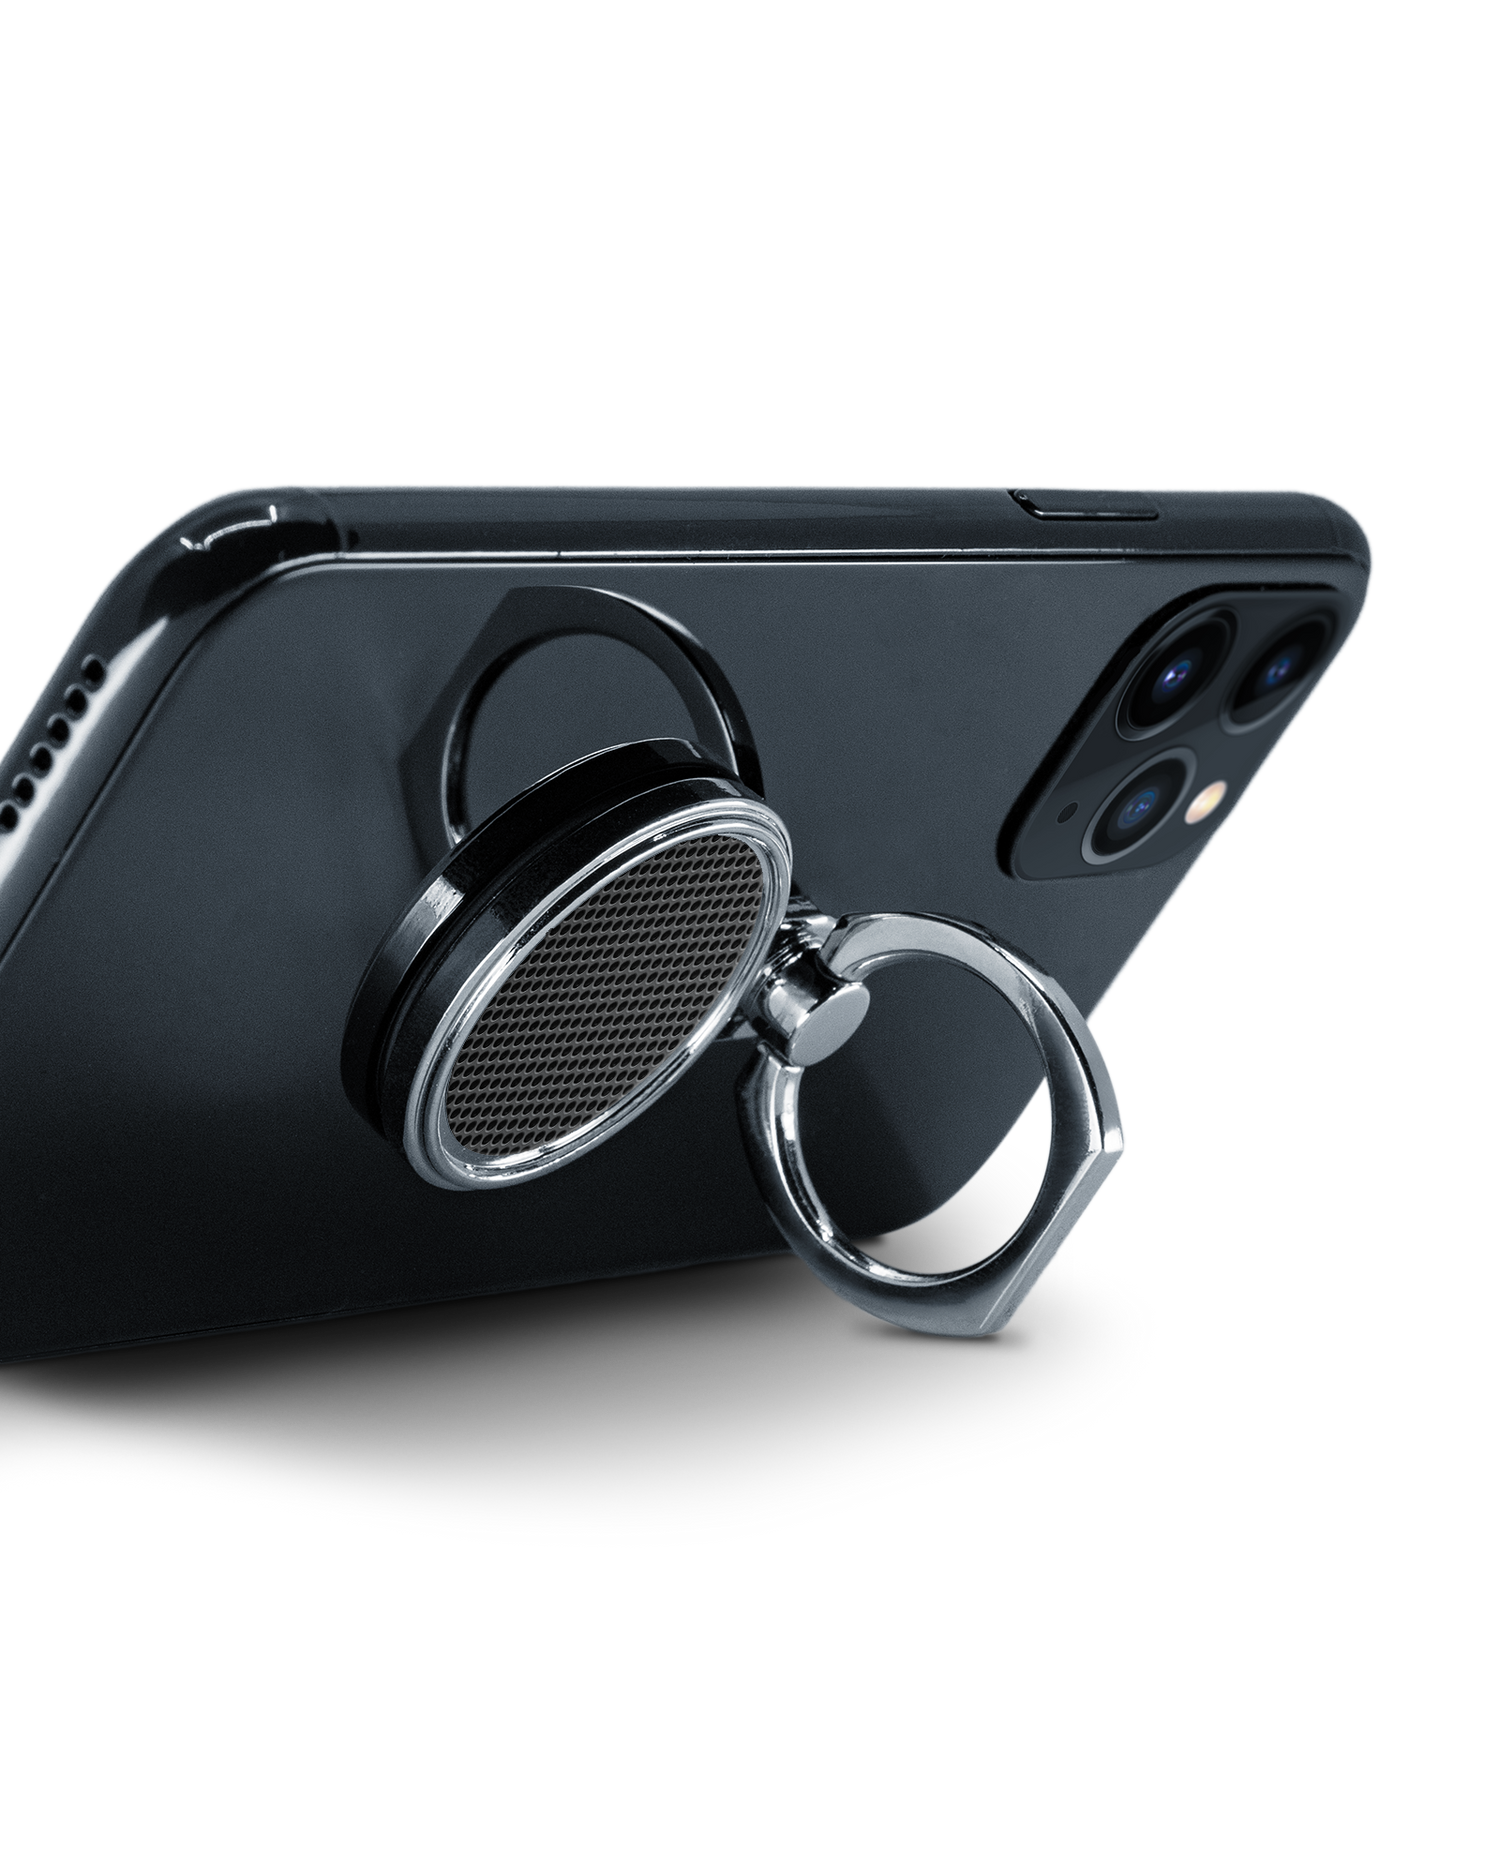 Carbon II Ring Holder attached to a smartphone